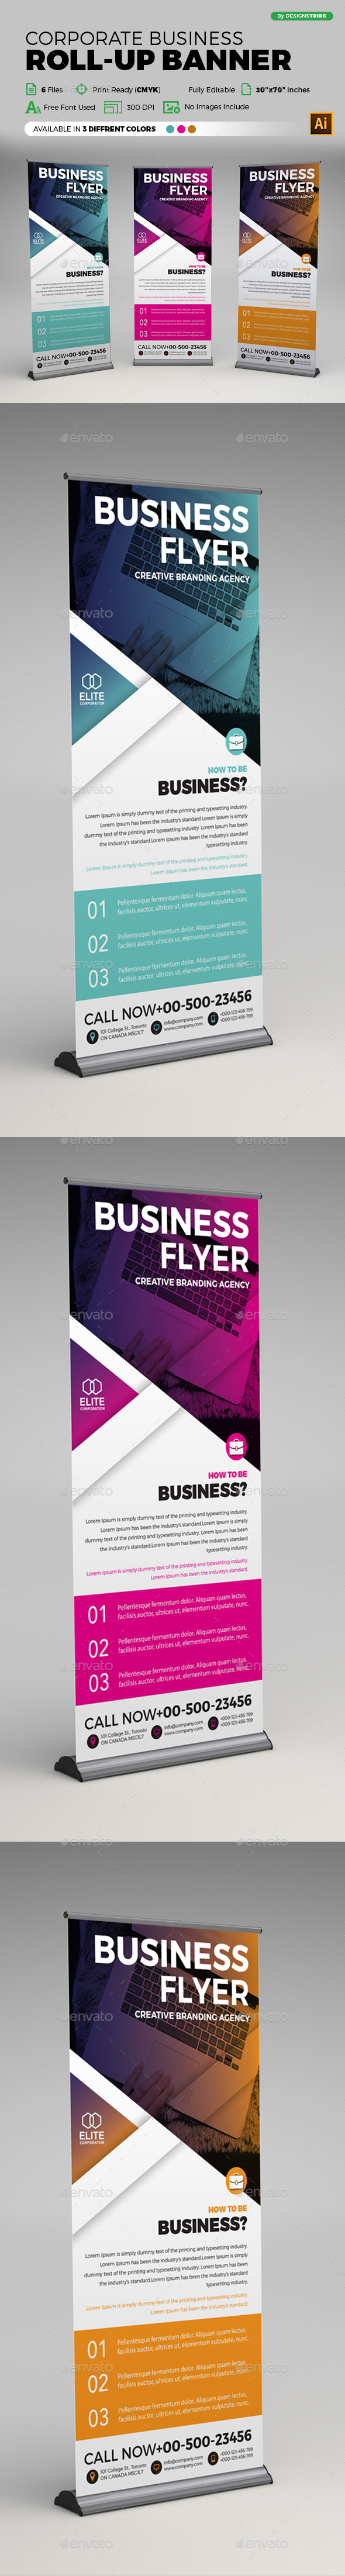 GraphicRiver Corporate Business Roll-up Banner 21179617